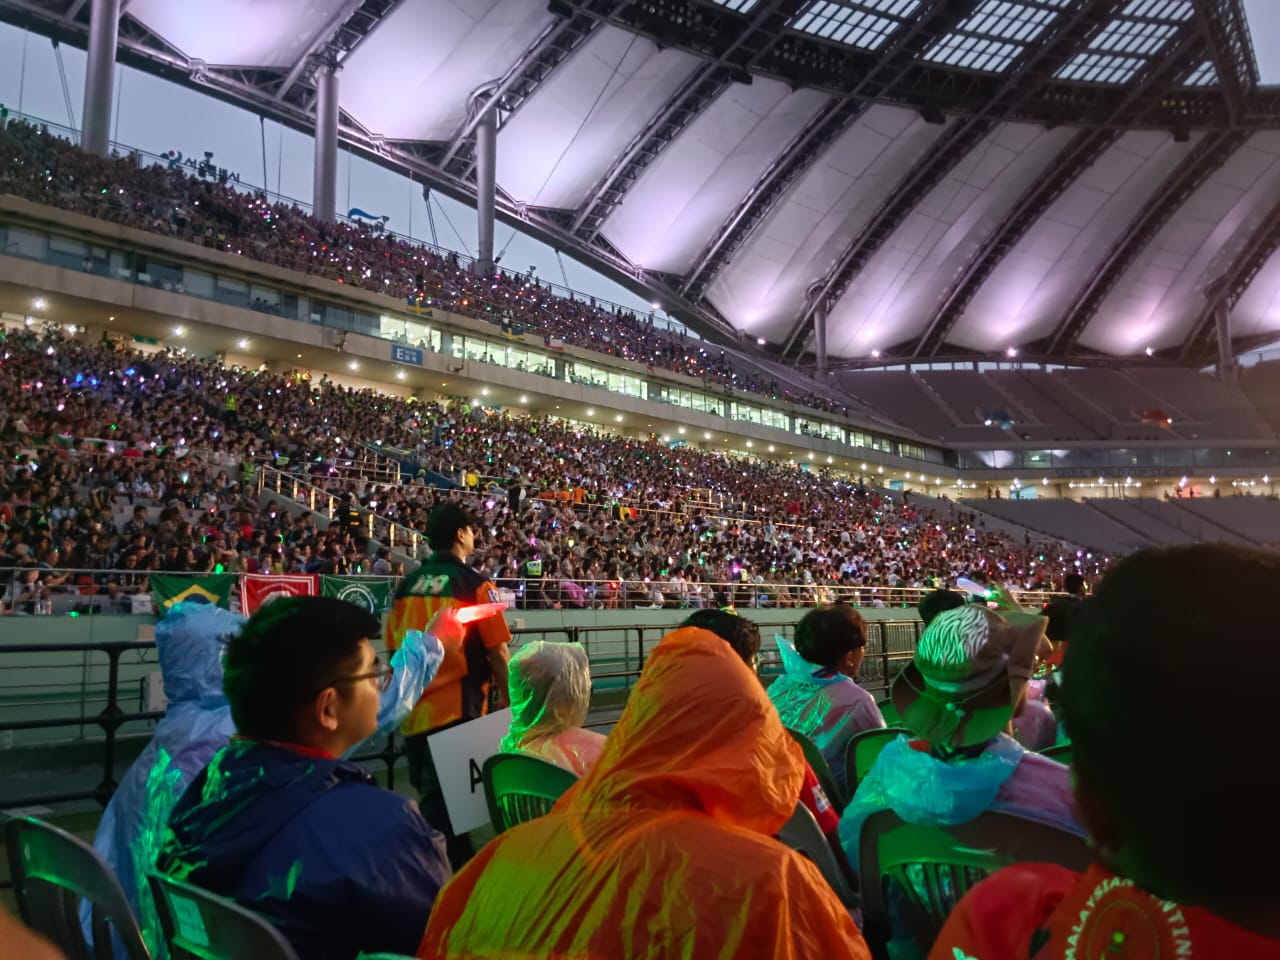 Closing ceremony of the wsj 25